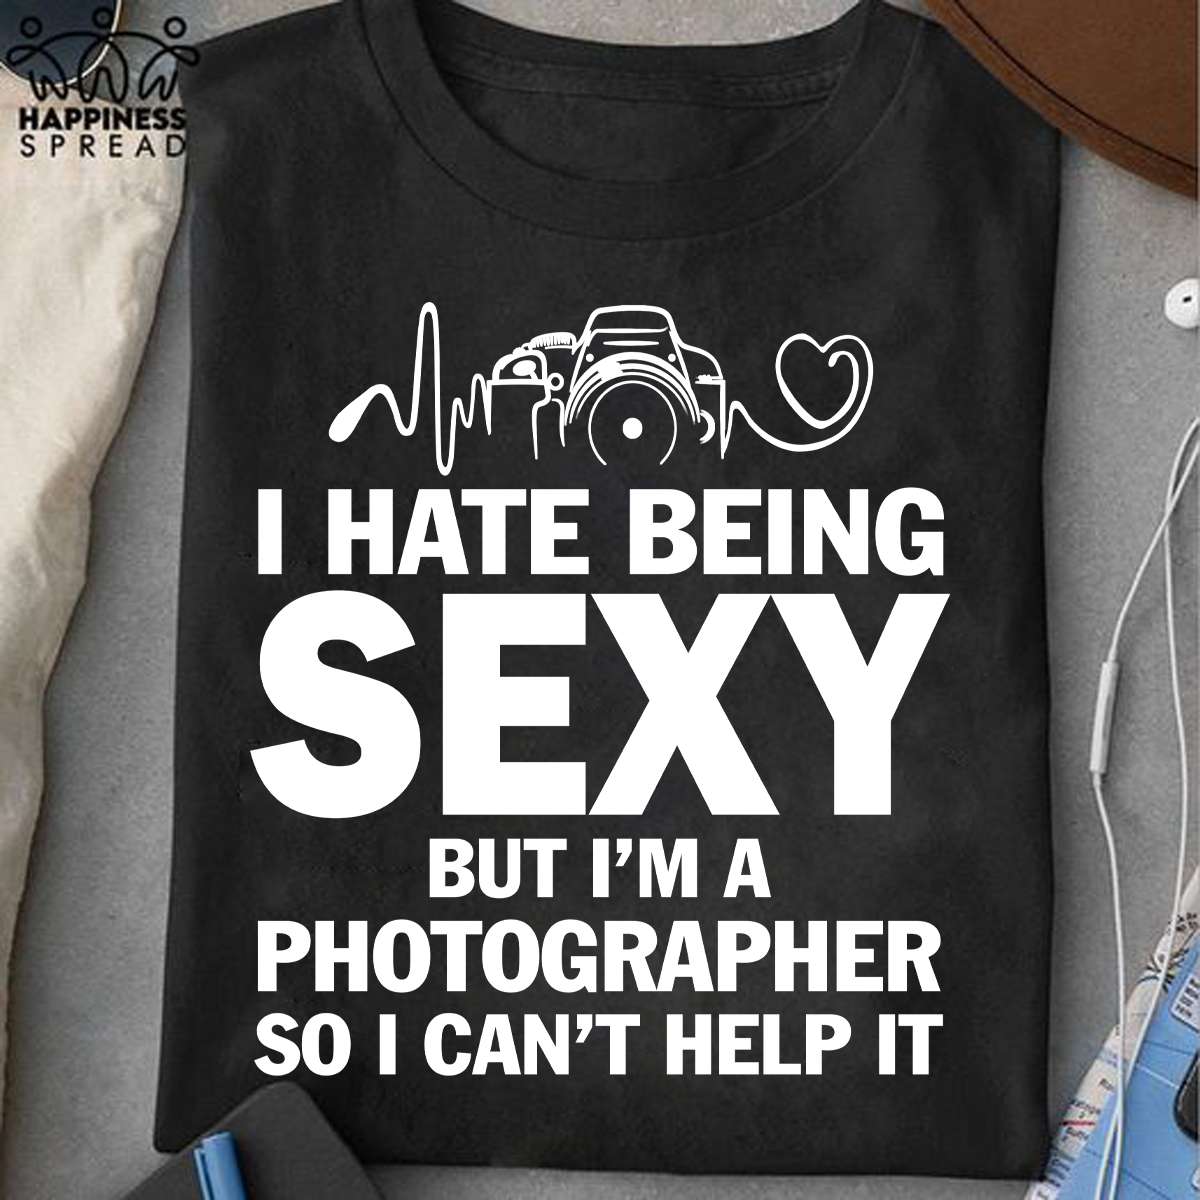 Photographer Job - I hate being sexy but i'm a photographer so i can't help it